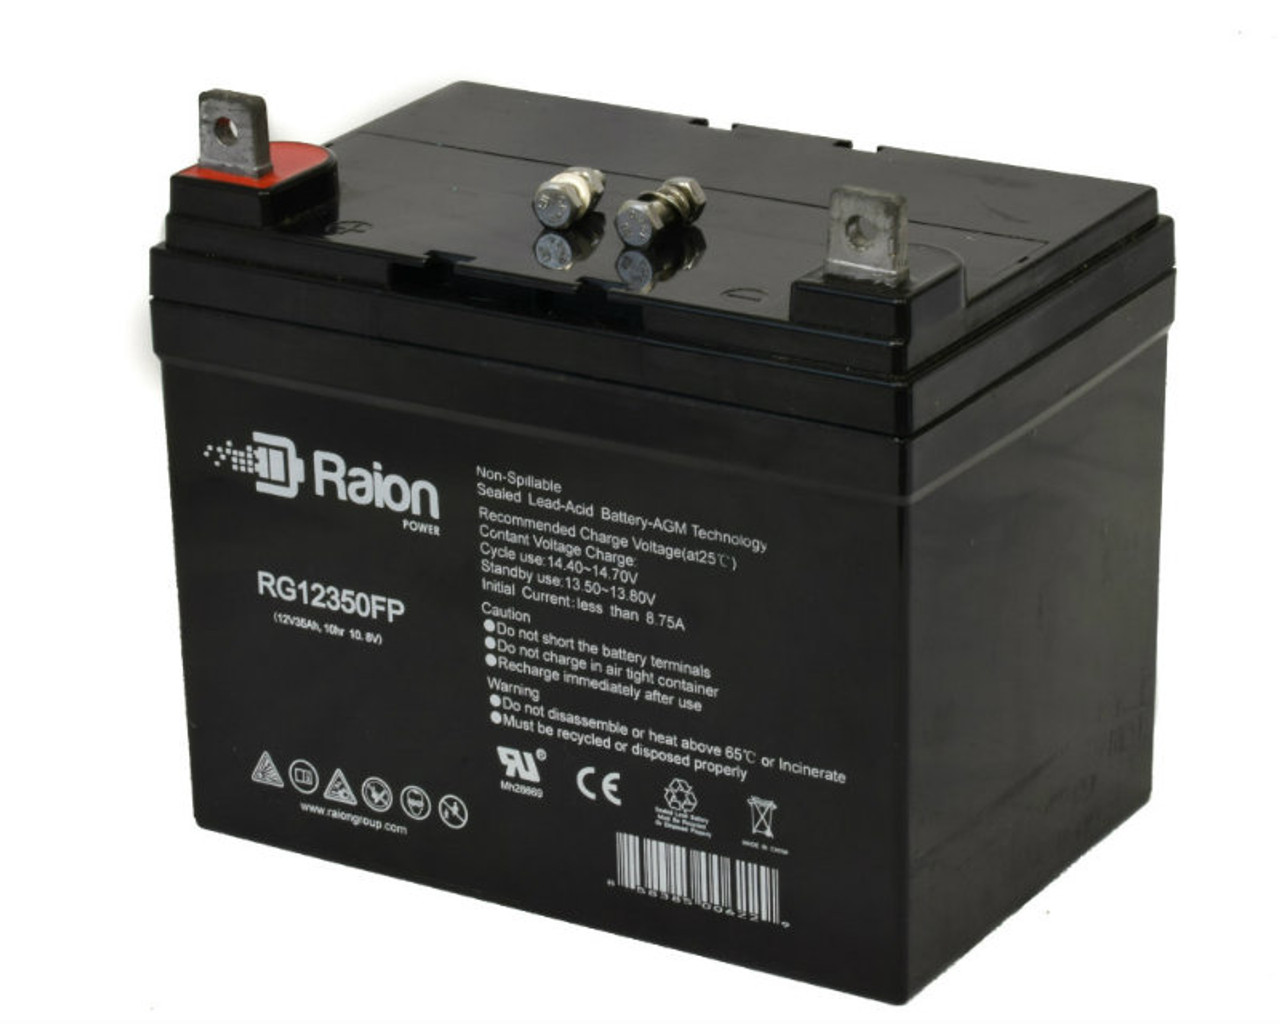 Raion Power Replacement 12V 35Ah Battery for Ingersoll Equipment 4018 - 1 Pack